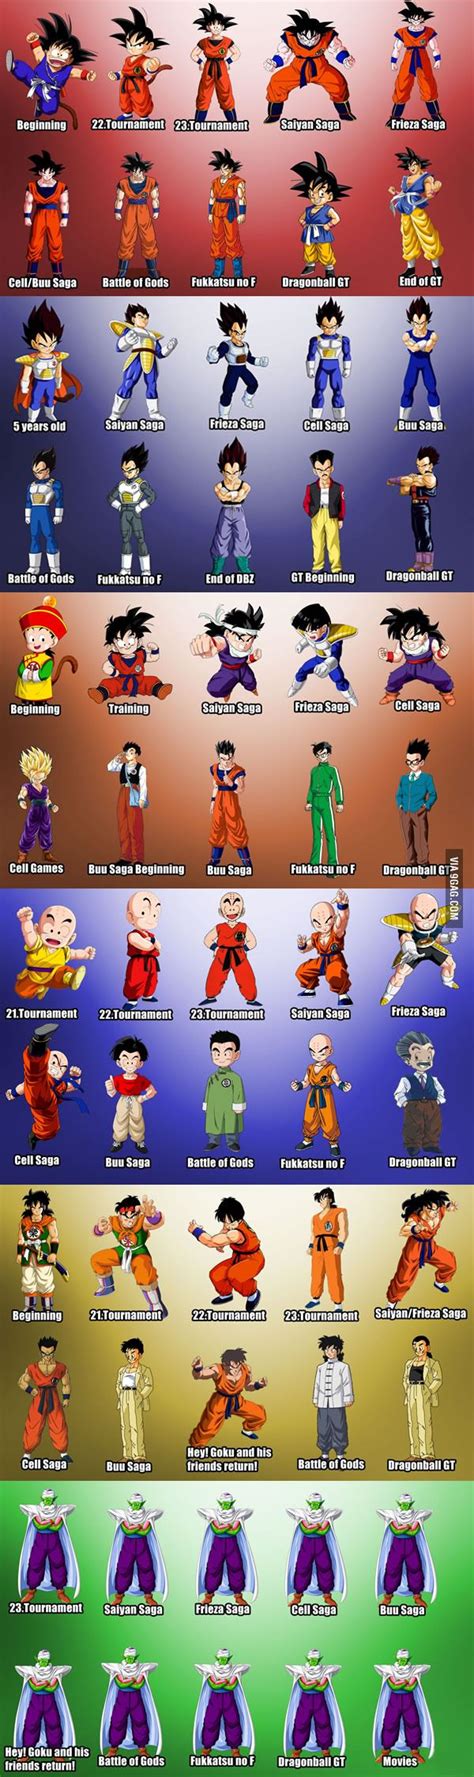 It started off as a 'manga' series named 'dragon boy' then eventually evolving into an 'anime' you can get dbz roms at www.dragonballmaster.com this is the most reliable and best dbz site on the internet. L'évolution des personnages de Dragon Ball au fil des ...